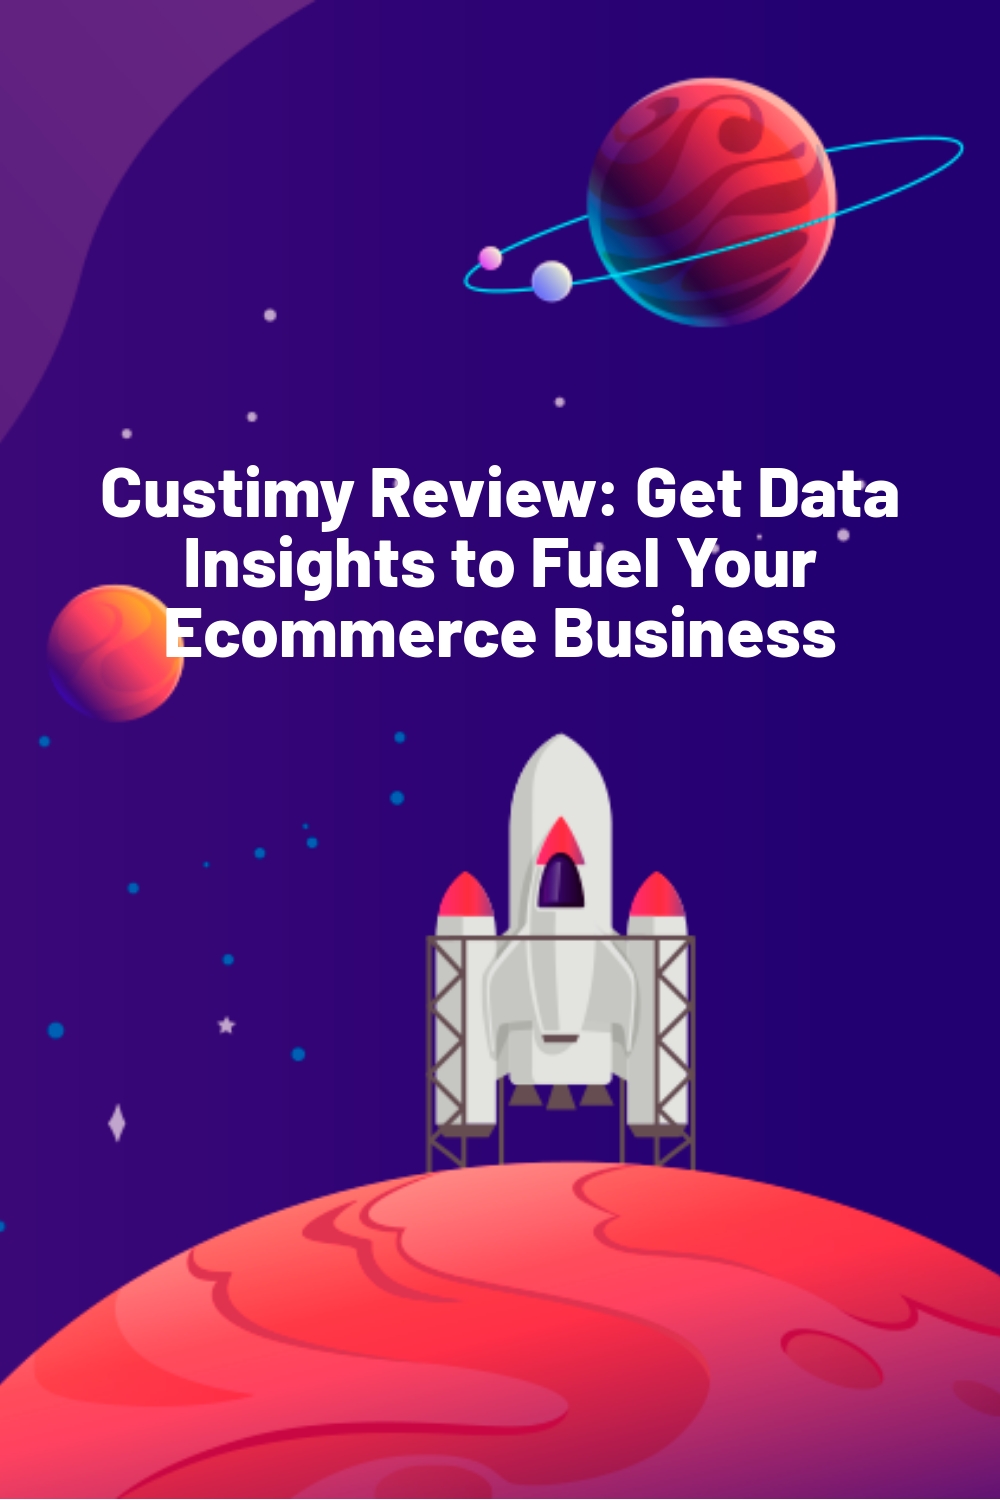 Custimy Review: Get Data Insights to Fuel Your Ecommerce Business